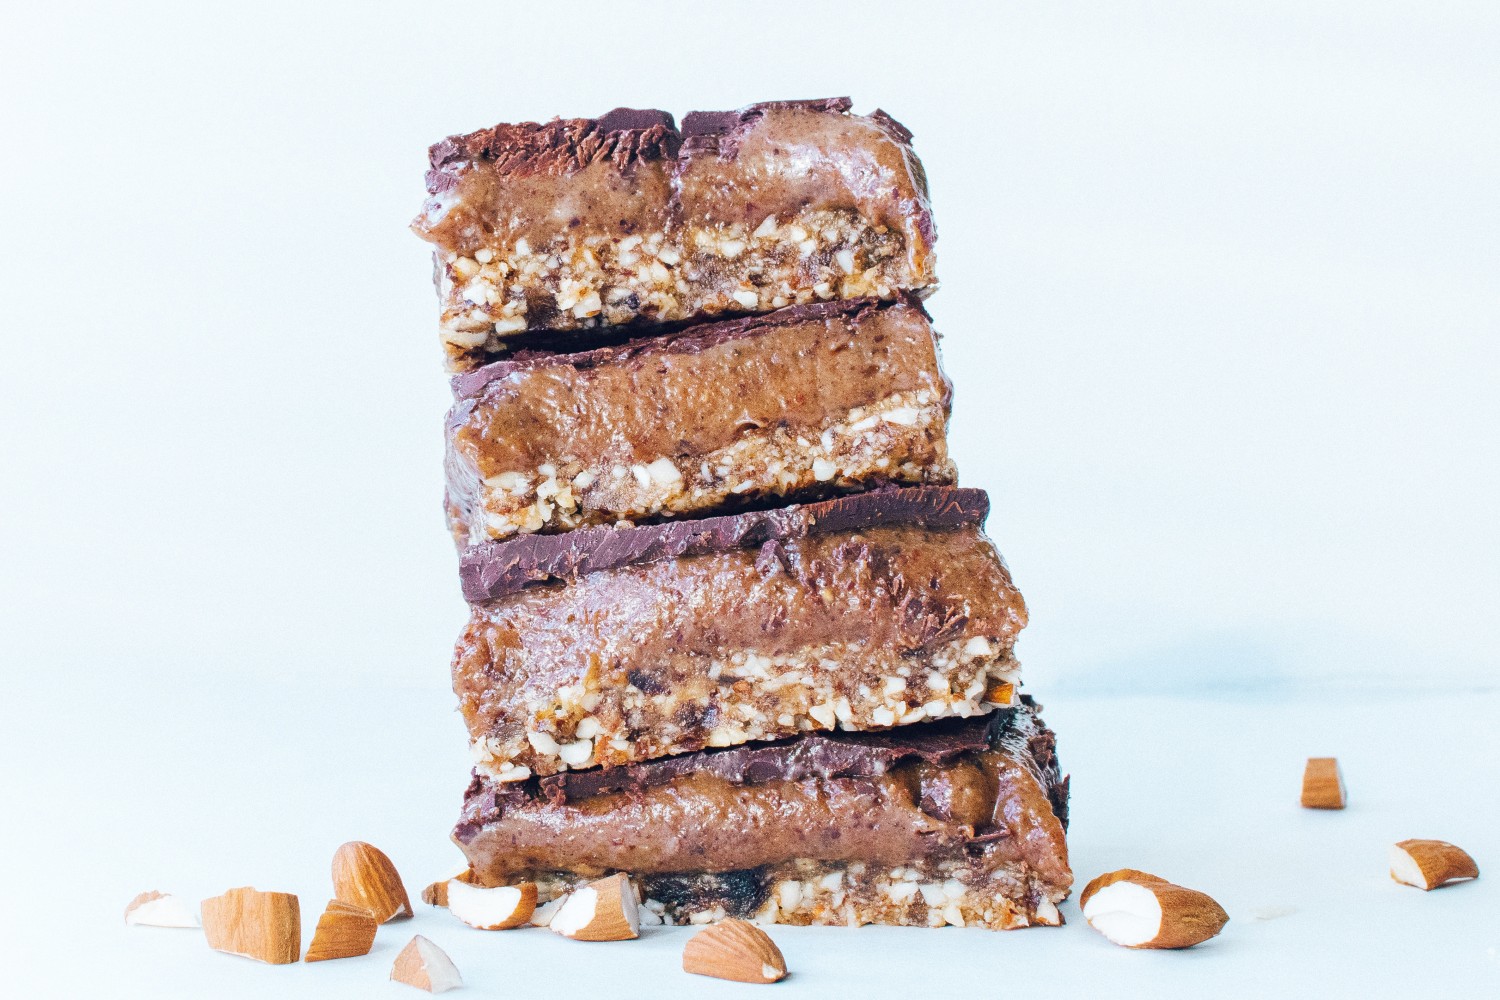 Almond butter caramel slices - raw, vegan, gluten-free and refined sugar free